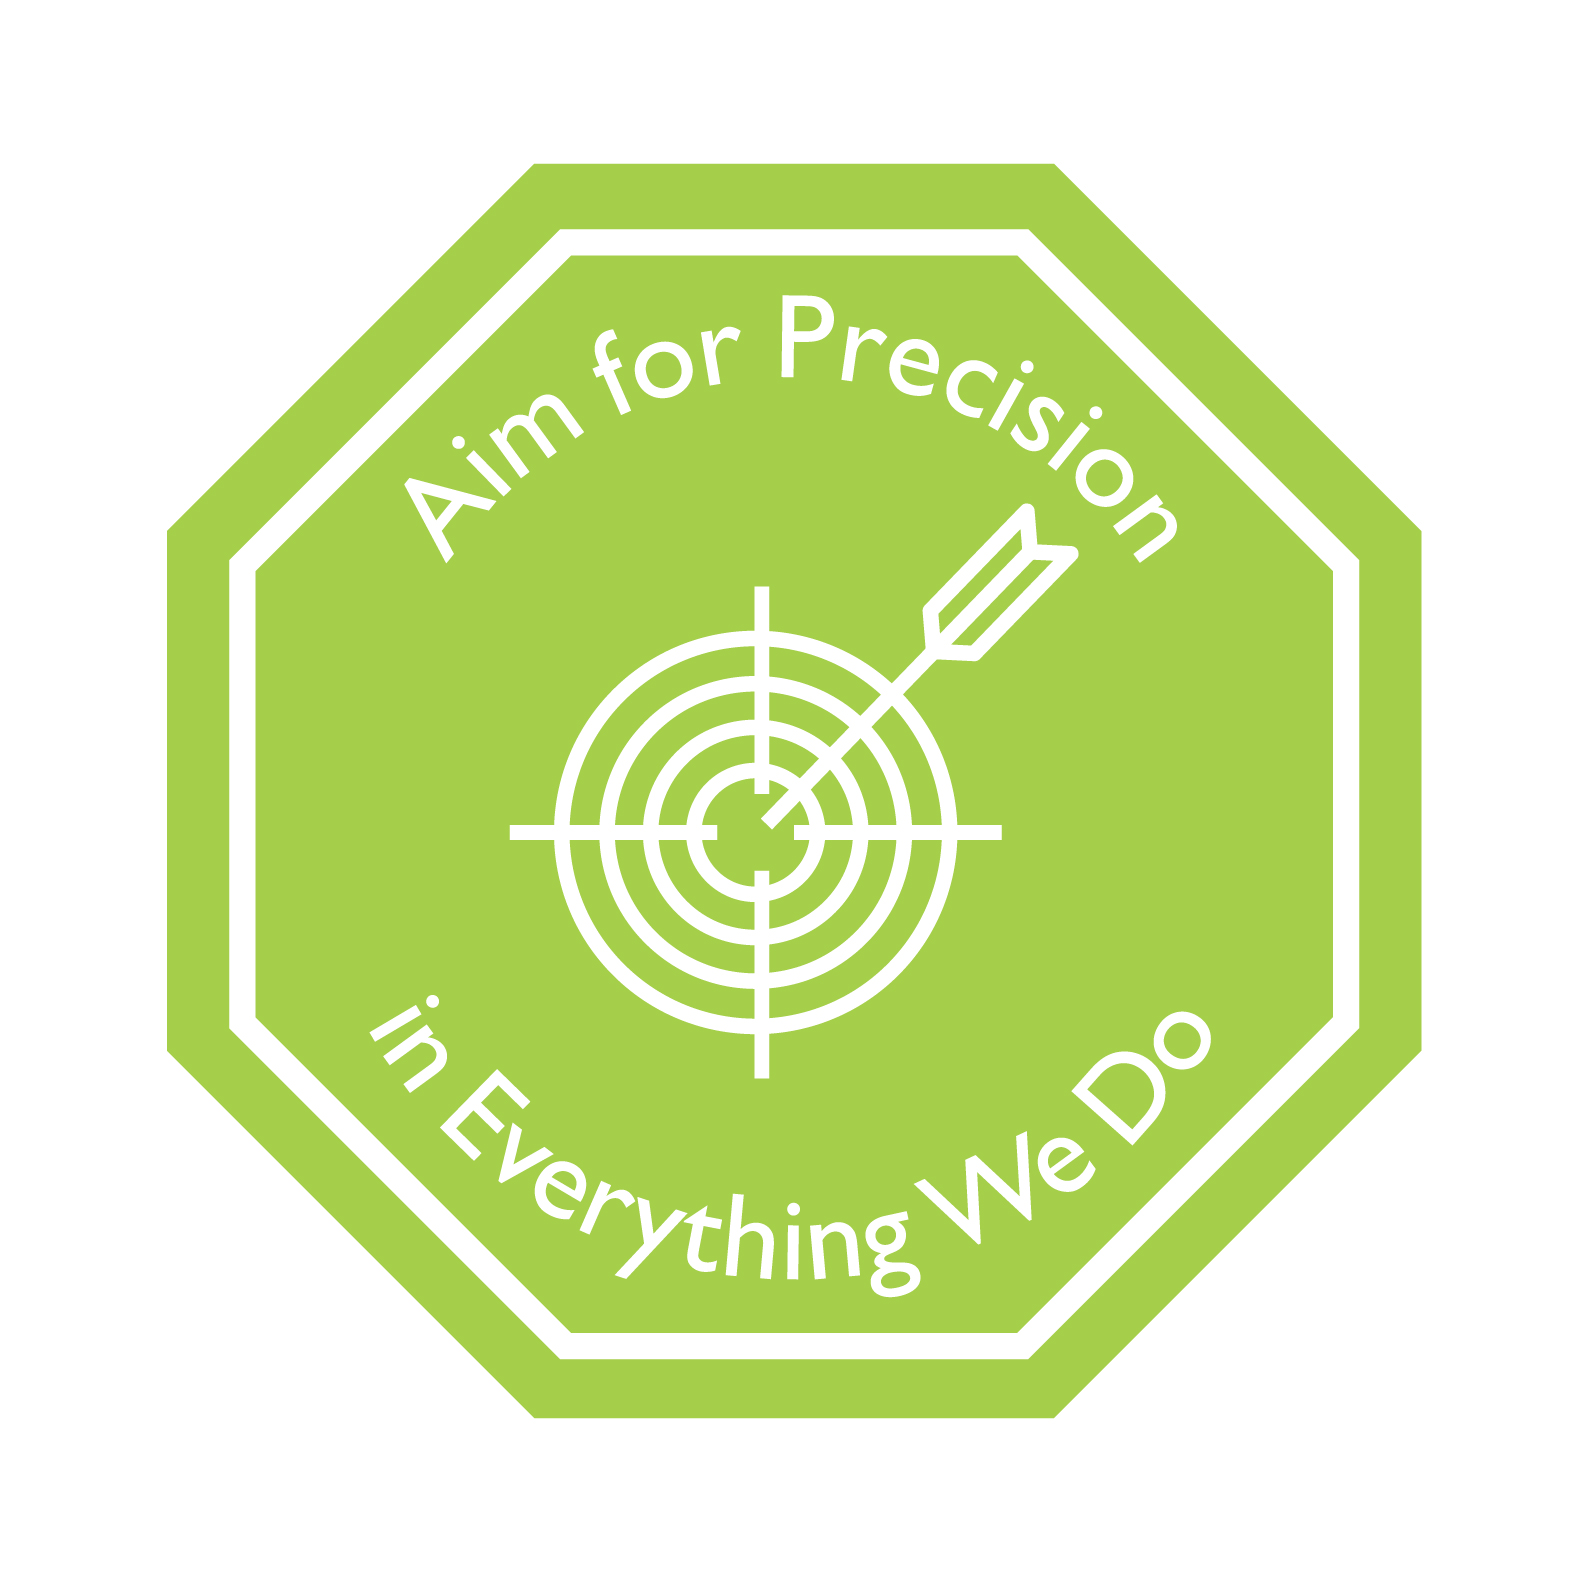 Aim for Precision in Everything We Do